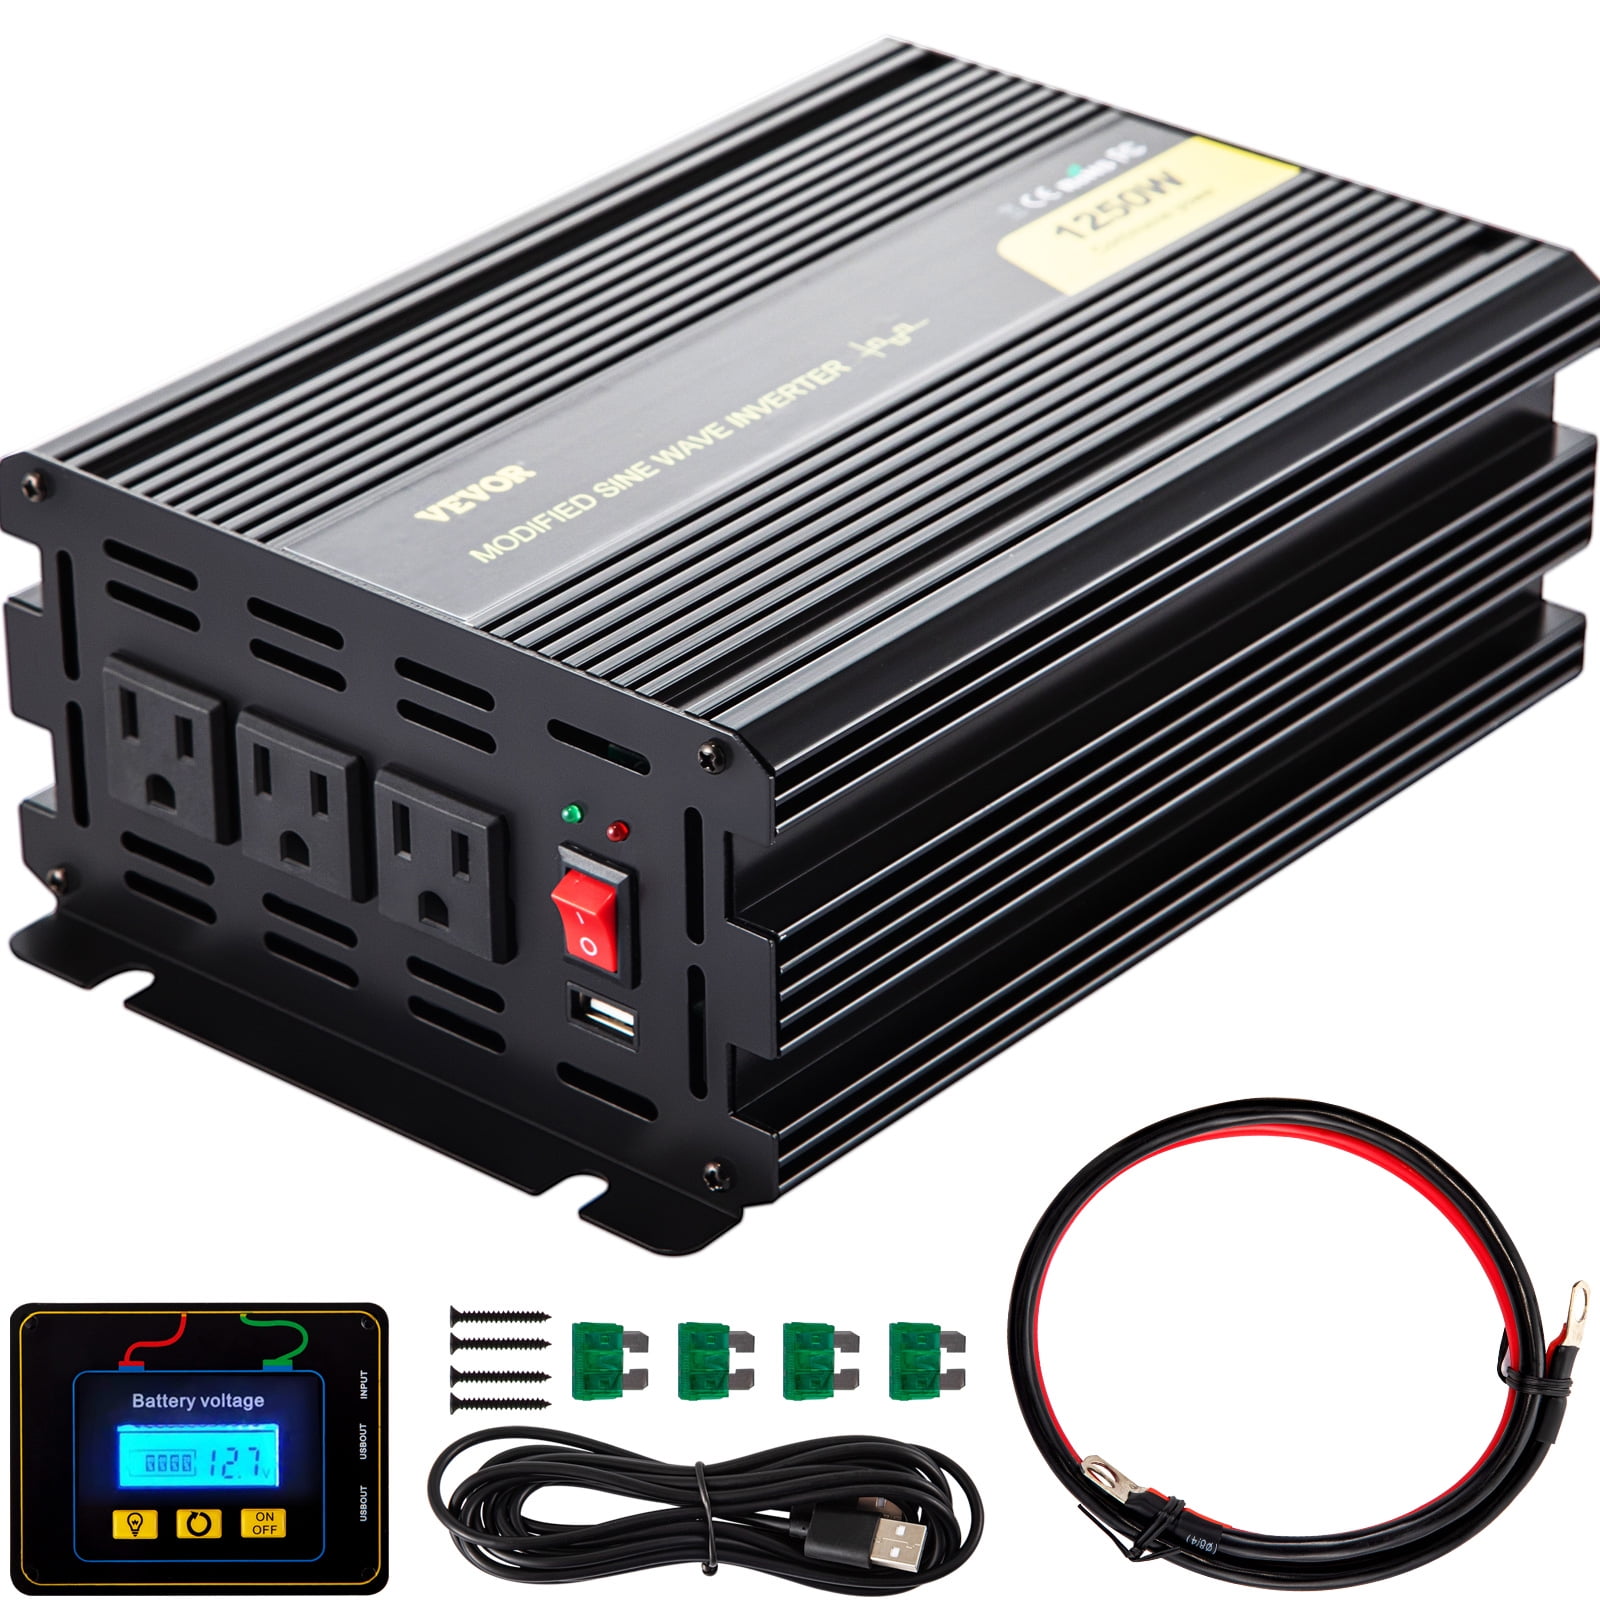 BYGD 800W Power Inverter Truck/RV 12V DC to 110V AC Converter with Dual AC Outlets 2*2.1A USB Ports Car Inverter